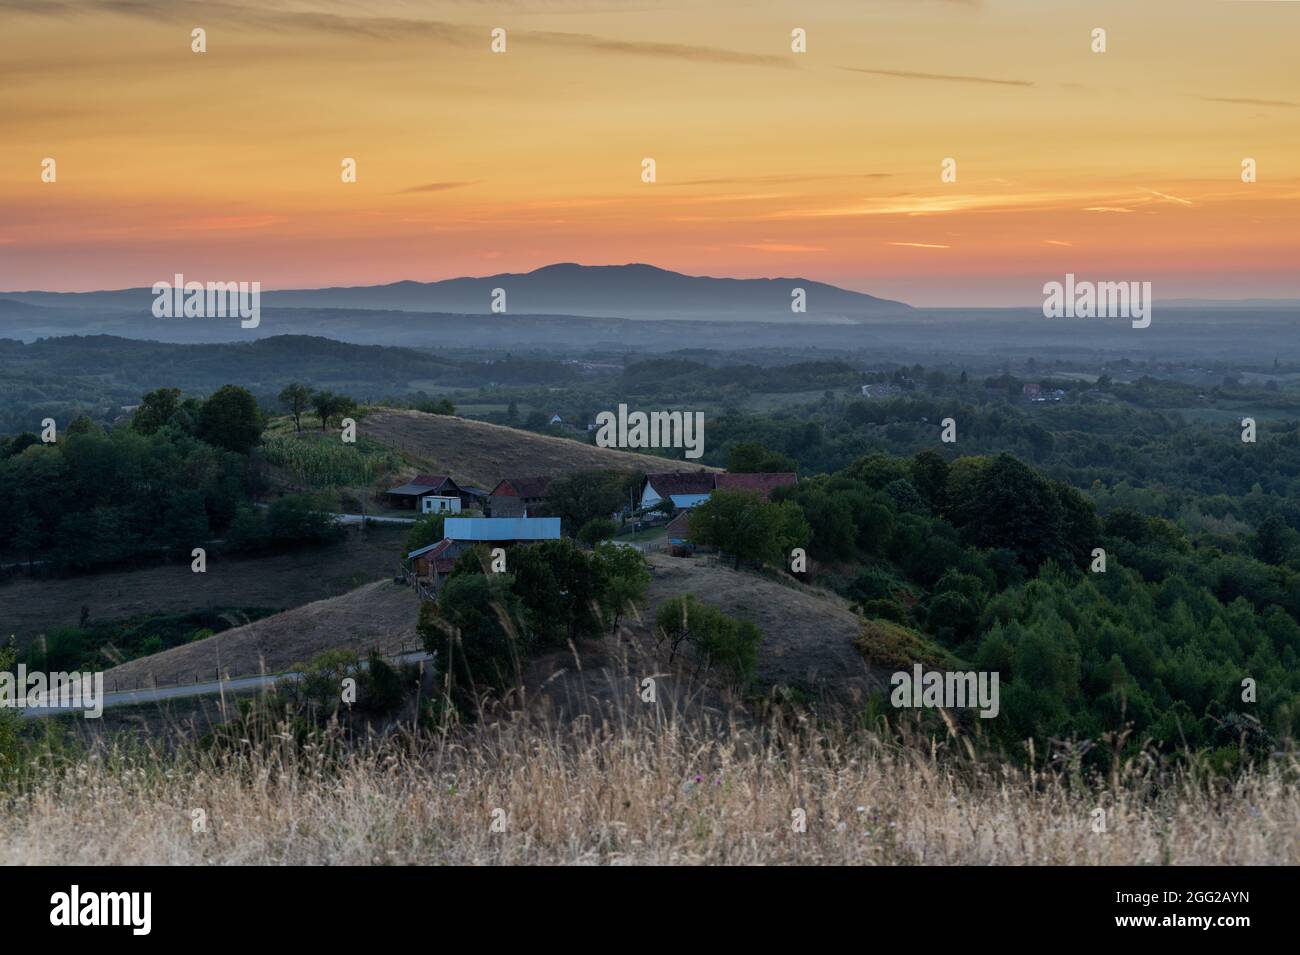 Hilly countryside landscape with farmhouse, meadows, forests and distant mountain in haze, beautiful vivid color in sky at dusk Stock Photo